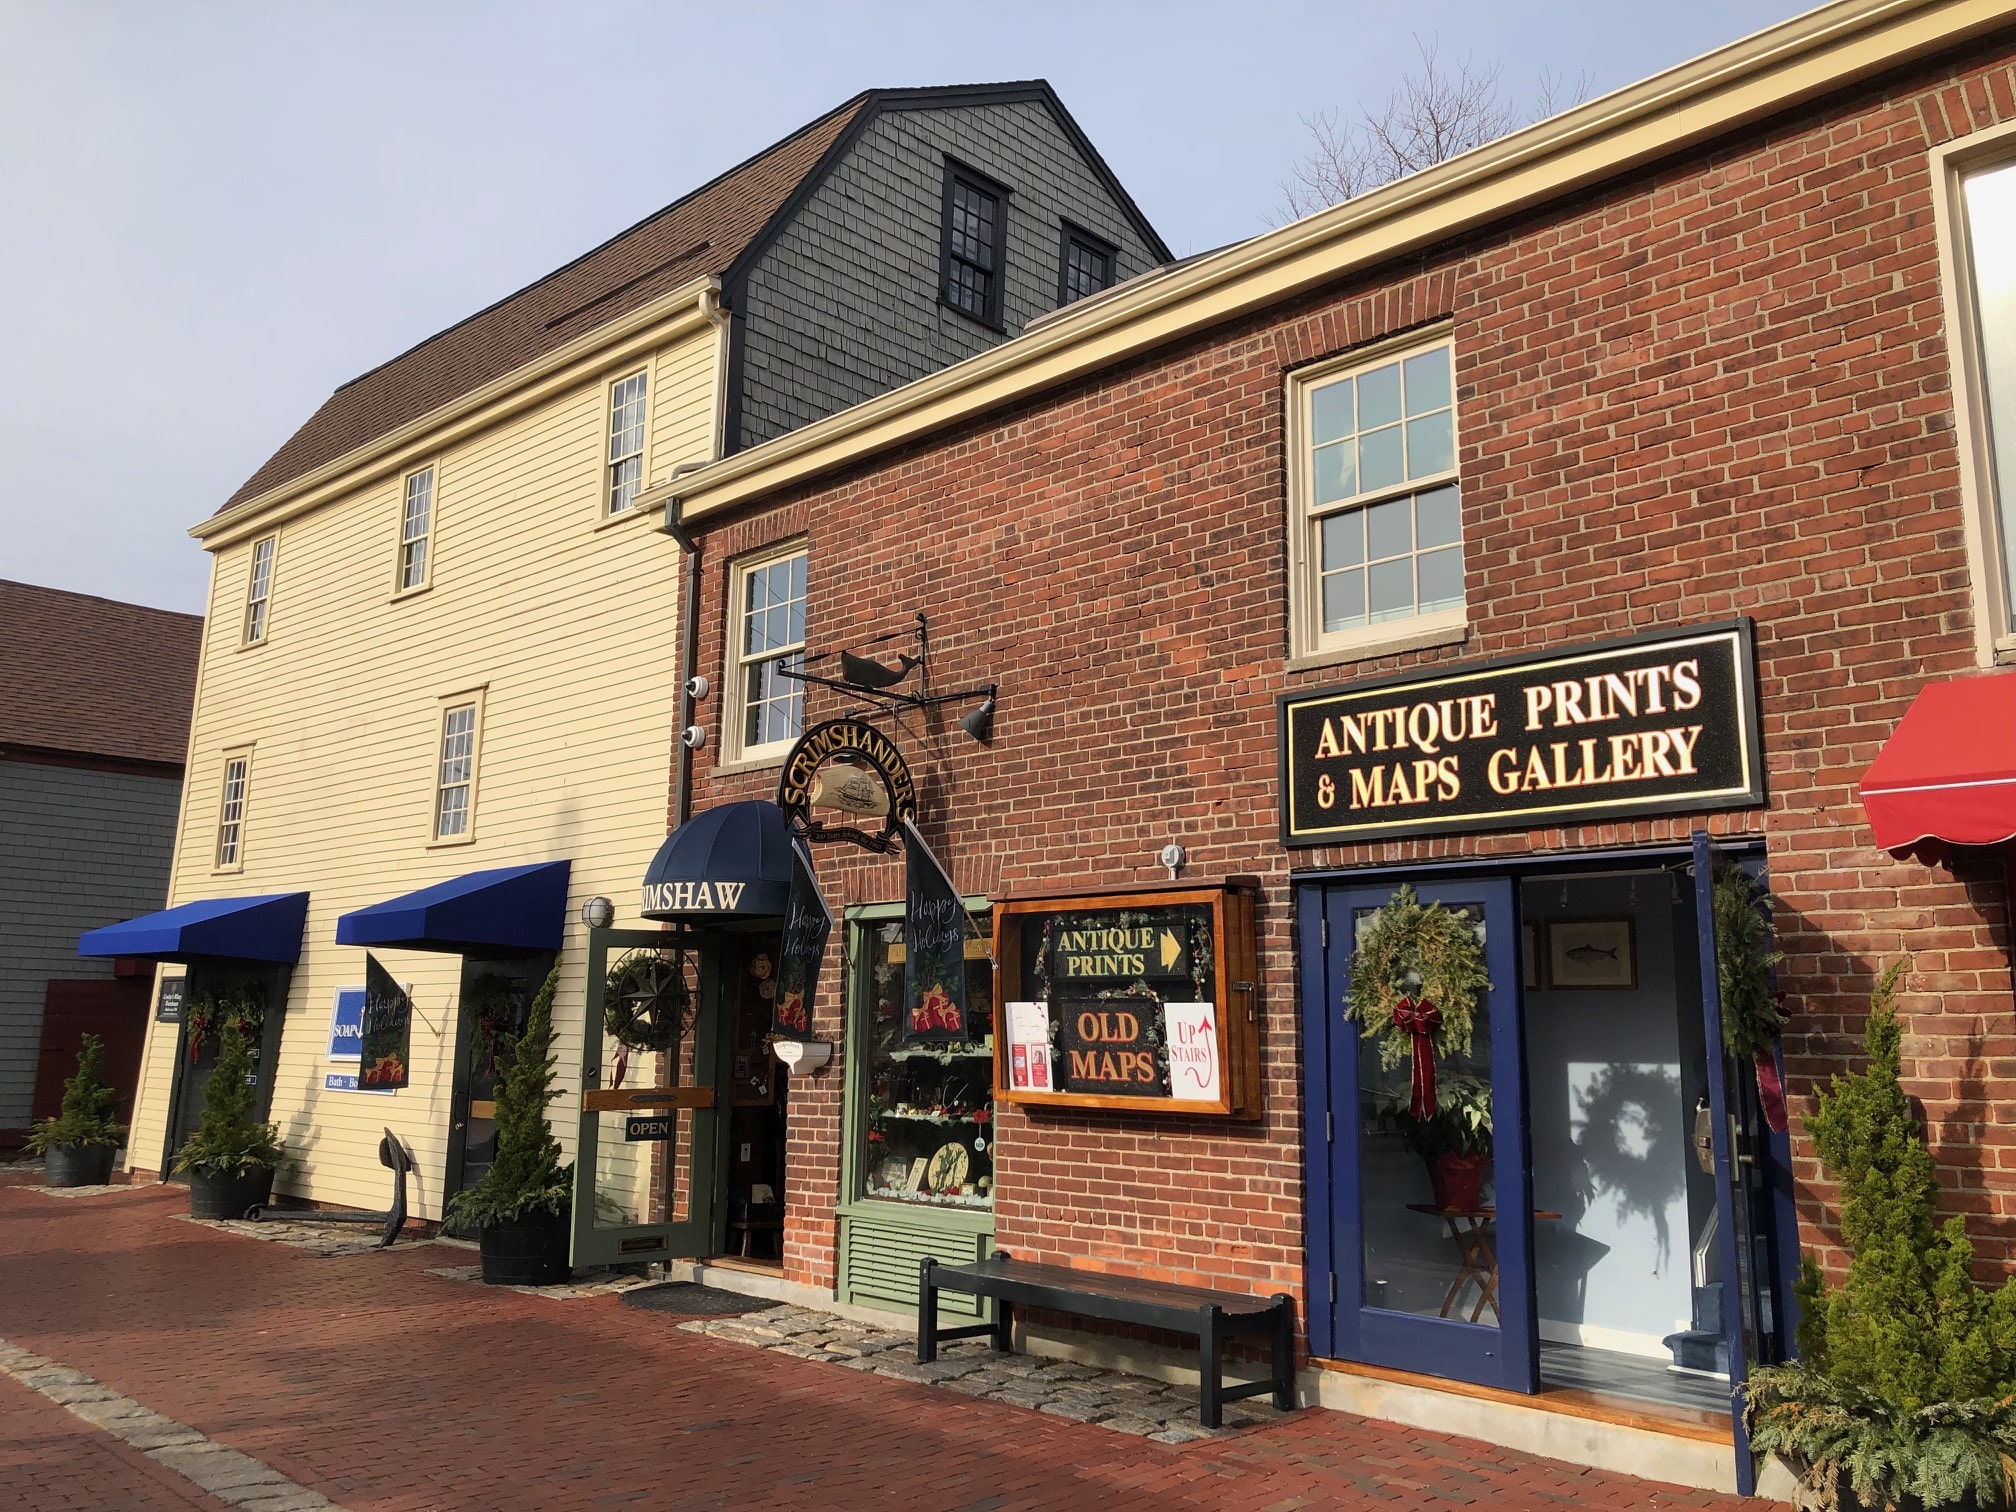 Anne Hall Antique Prints, is a highly specialized, Newport antiques gallery. It is located upstairs, on historic Bowen's Wharf. Look for signs: Antique Prints and Maps Gallery. Explore geography though old maps. Learn about antique prints over 100 years old. 